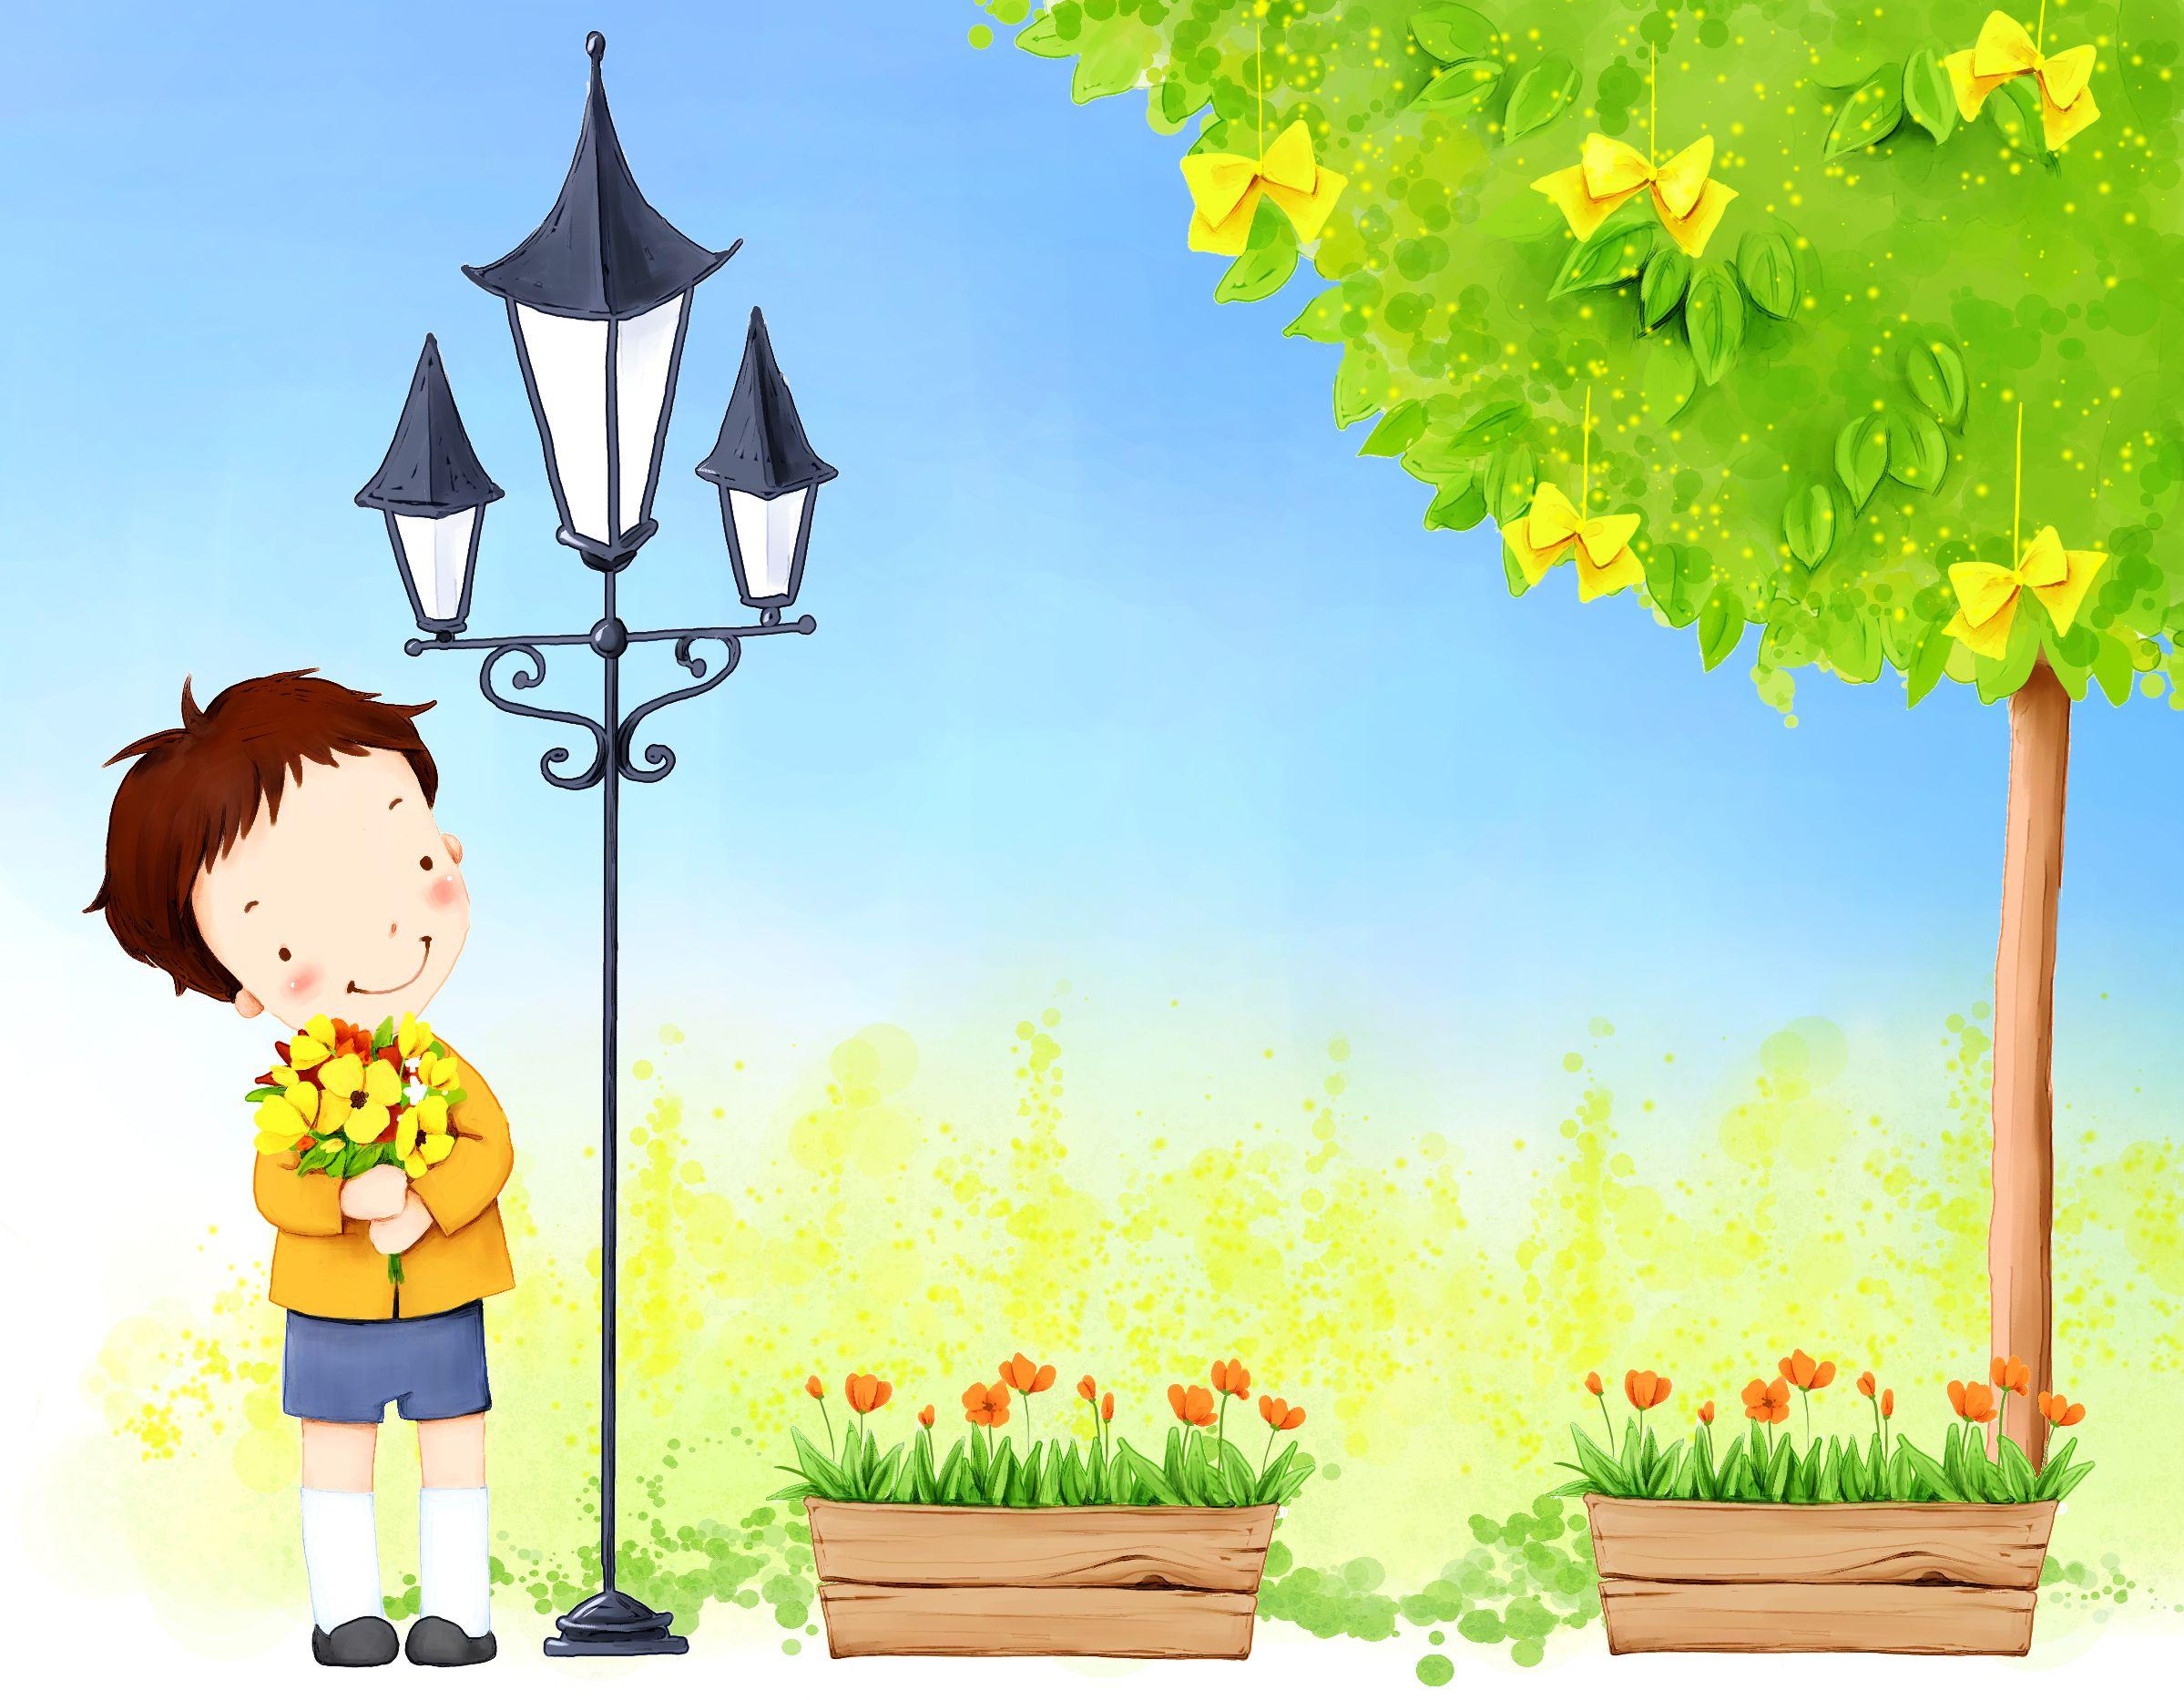 Free PSD Cartoon Background in Different Art Styles